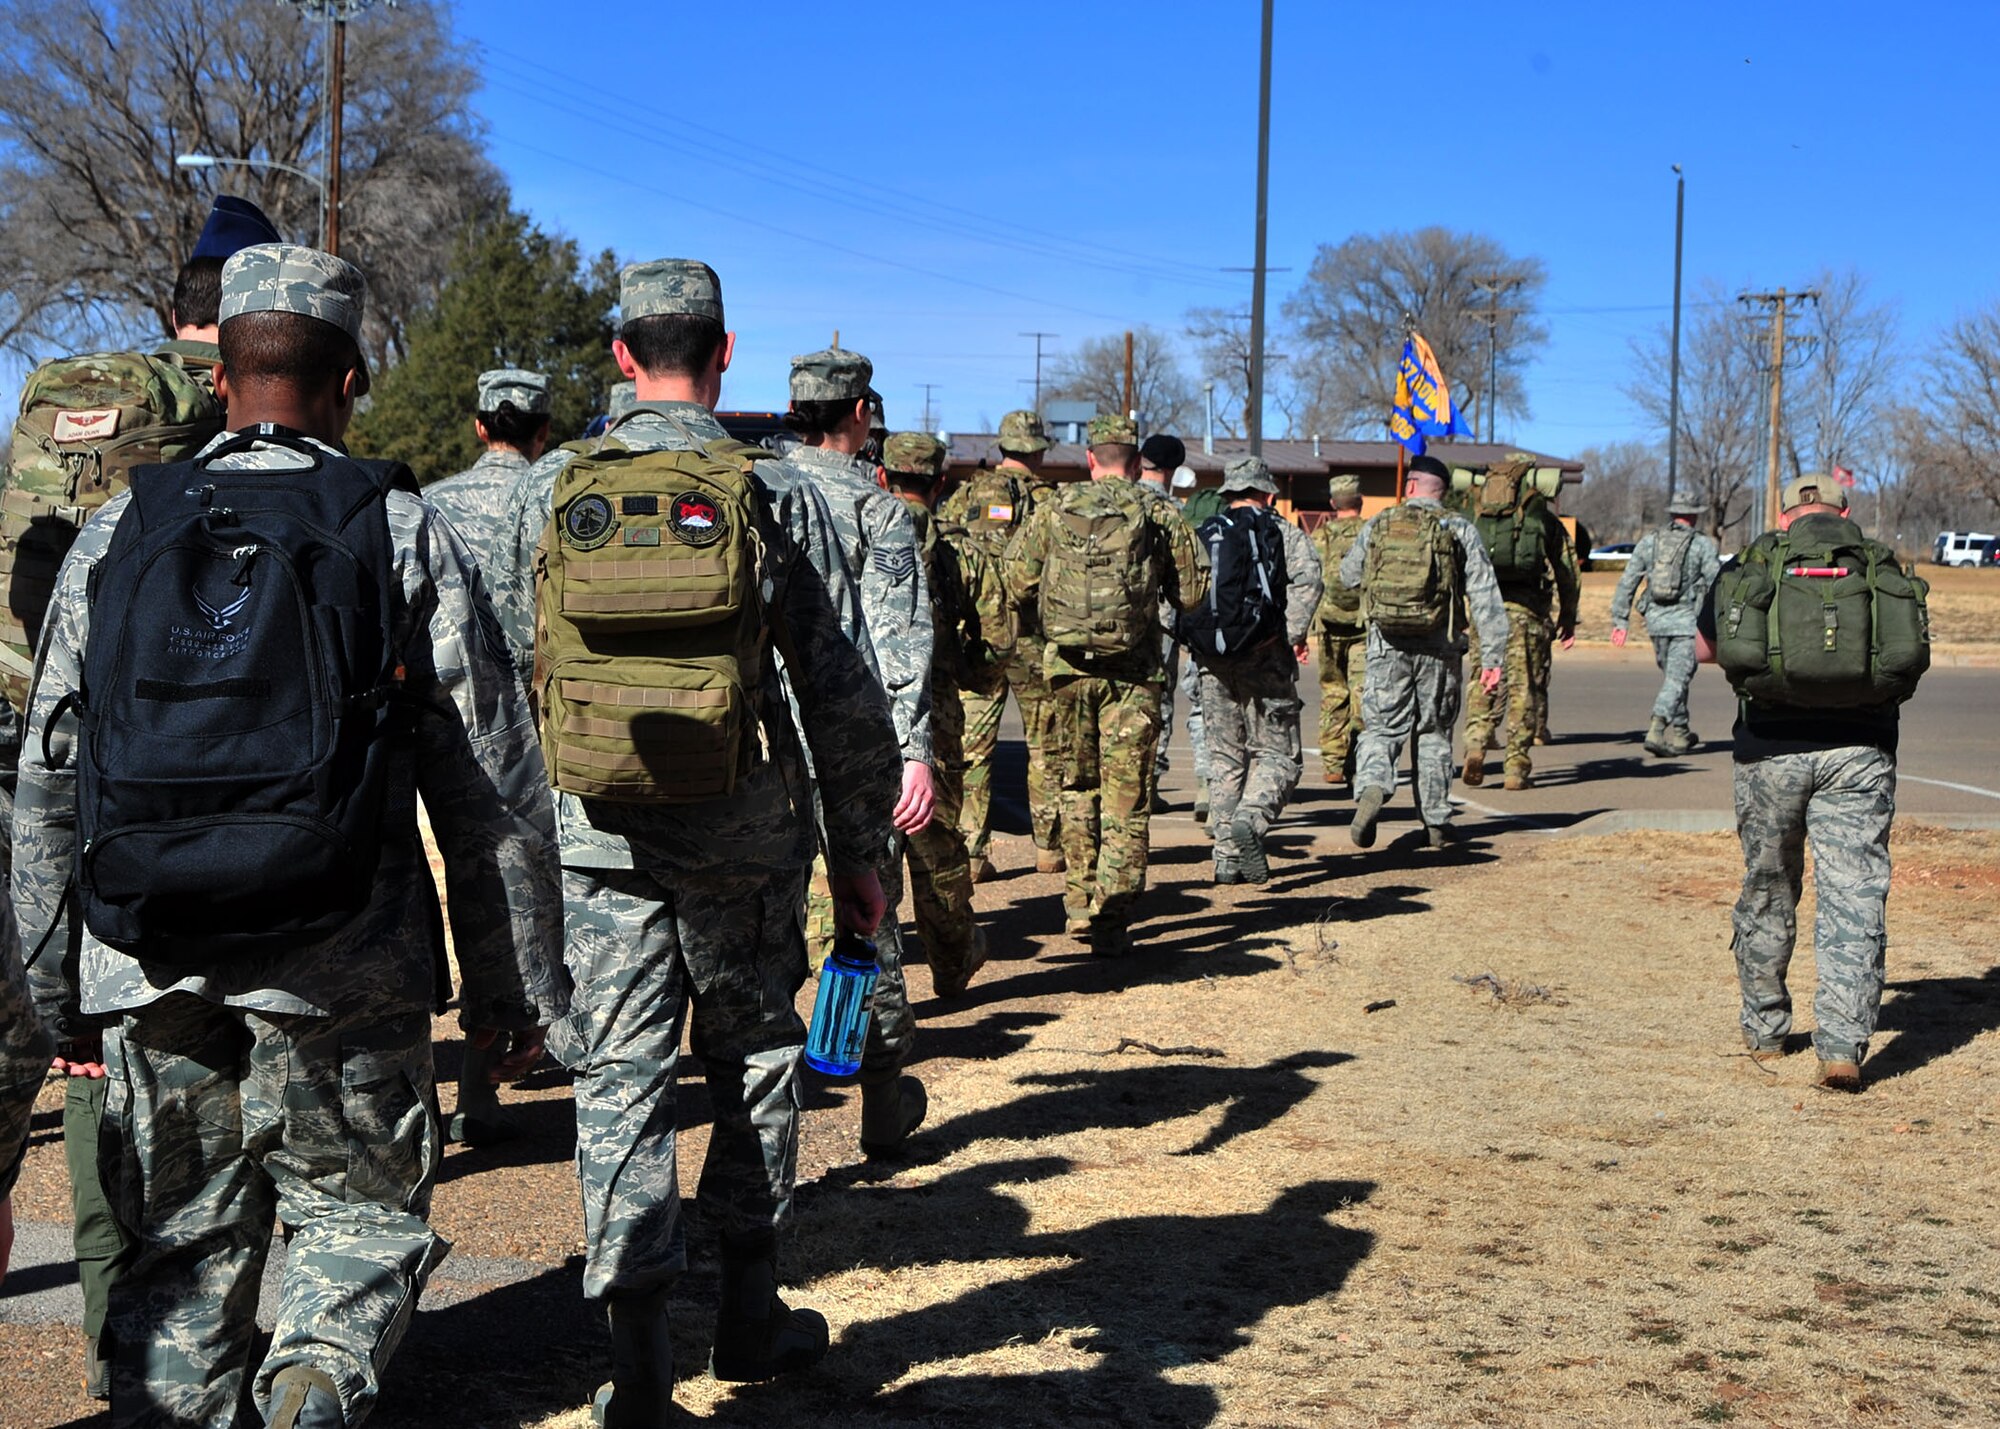 U.S. Air Force Air Commandos from Cannon Air Force Base, N.M., begin a six-mile memorial ruck march, Feb. 18, 2014 at Cannon’s Unity Park. The march was conducted in honor of Capt. Ryan Hall, Capt. Nicholas Whitlock, 1st Lt. Justin Wilkens and Senior Airman Julian Scholten, the aircrew members who lost their lives when “Ratchet 33”, a U-28A, crashed in Djibouti, Africa, Feb. 18, 2012. (U.S. Air Force photo/Senior Airman Whitney Amstutz)